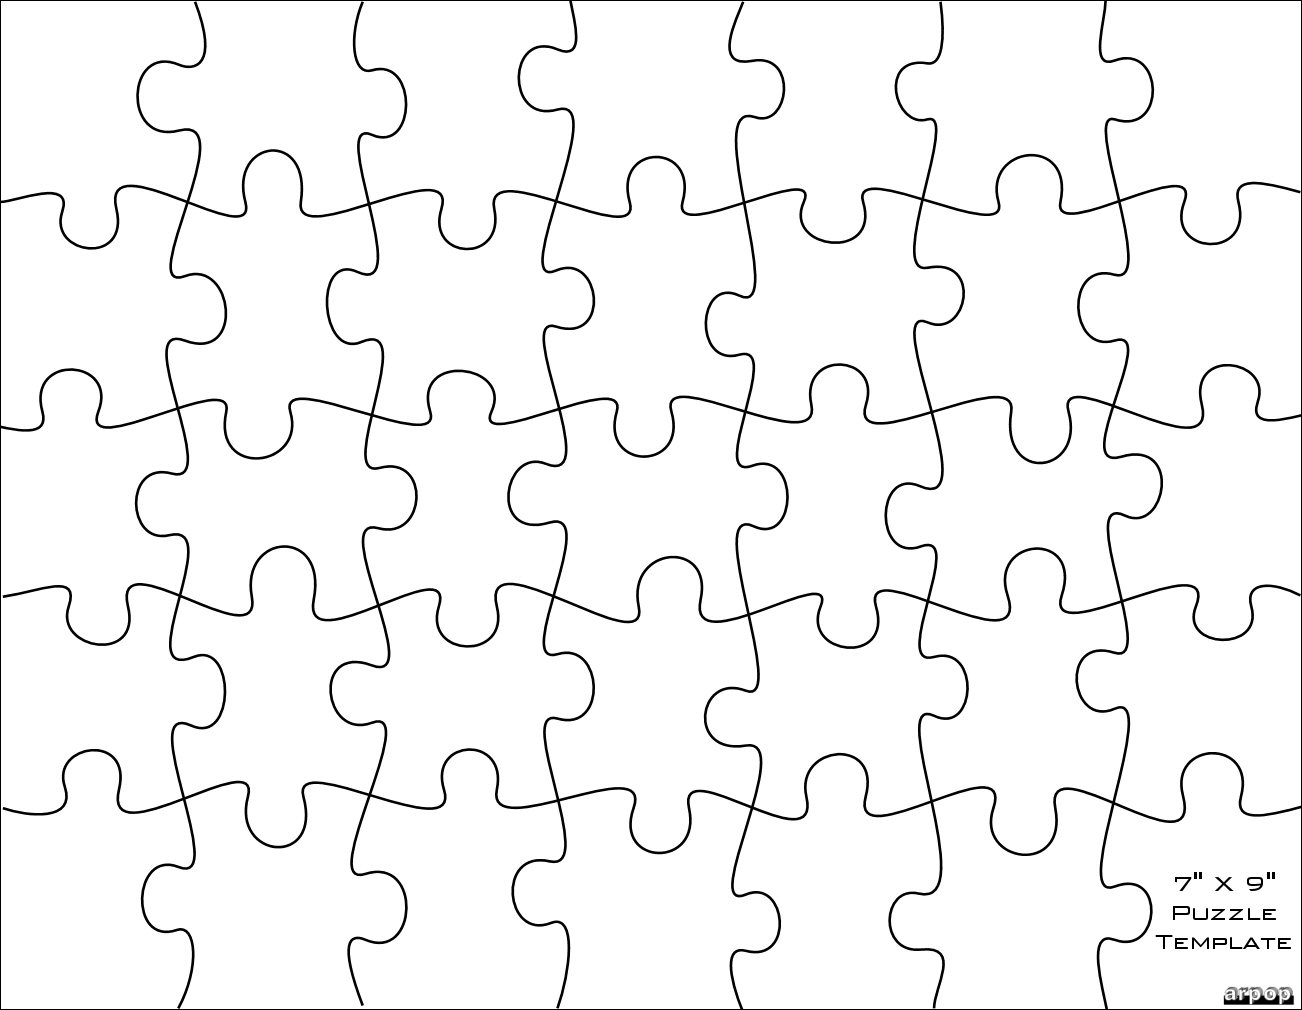 Free Puzzle Pieces Template, Download Free Clip Art, Free Clip Art - Printable Puzzle Template 8.5 X 11